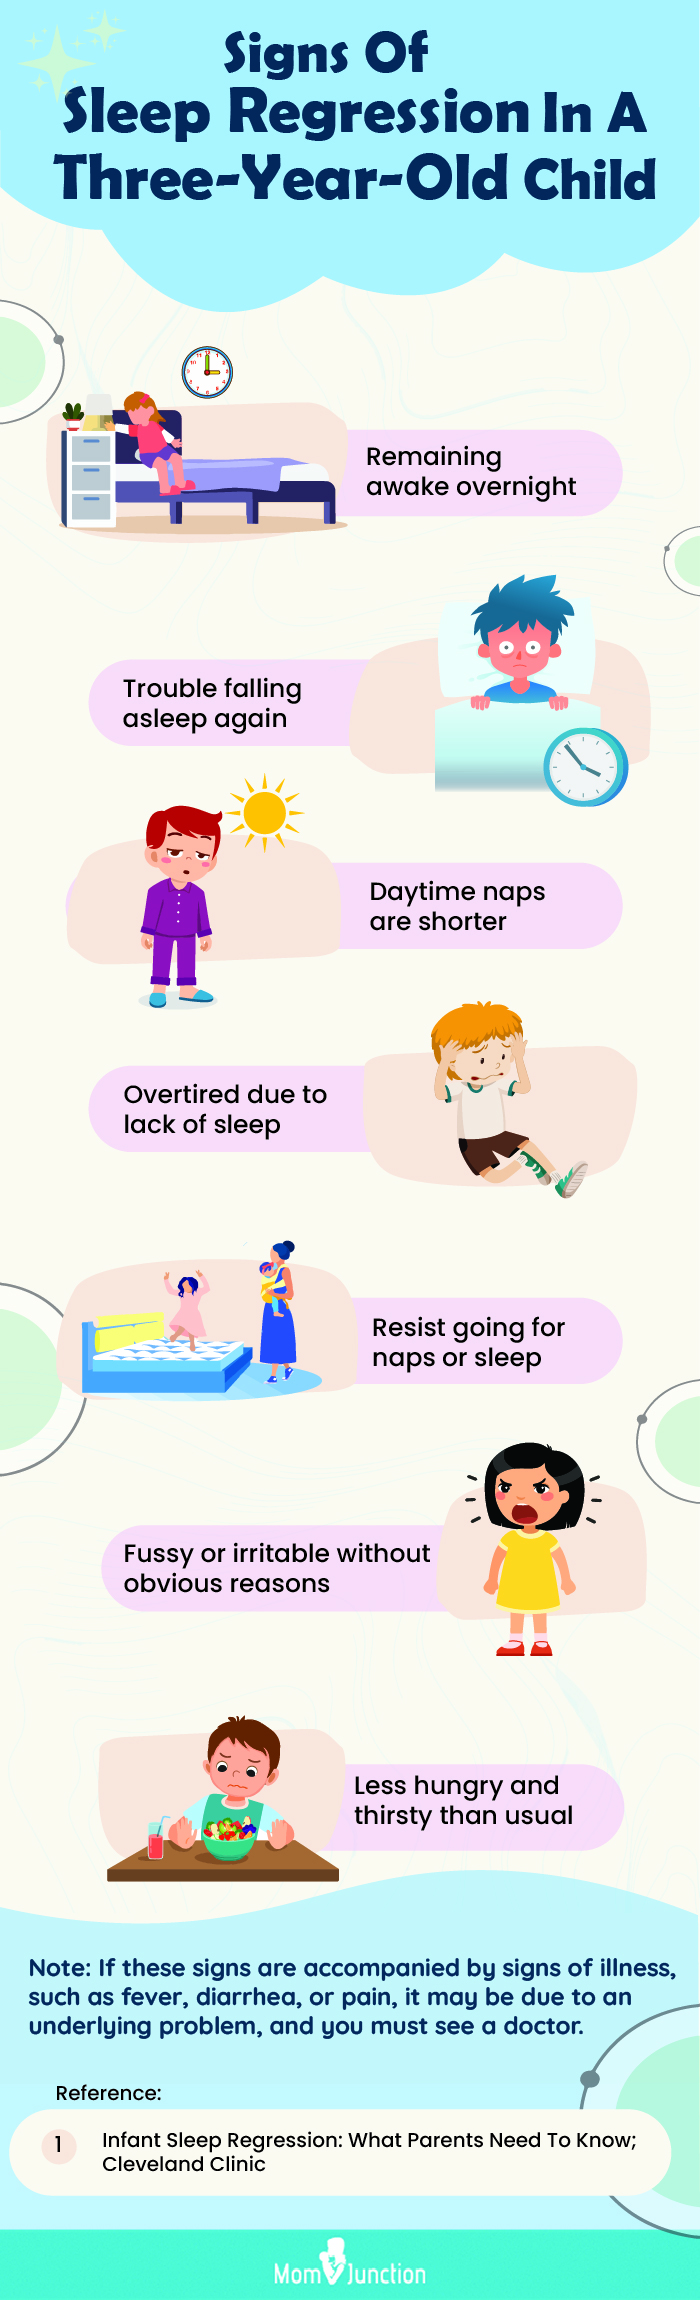 signs of sleep regression in a three year old child (infographic)